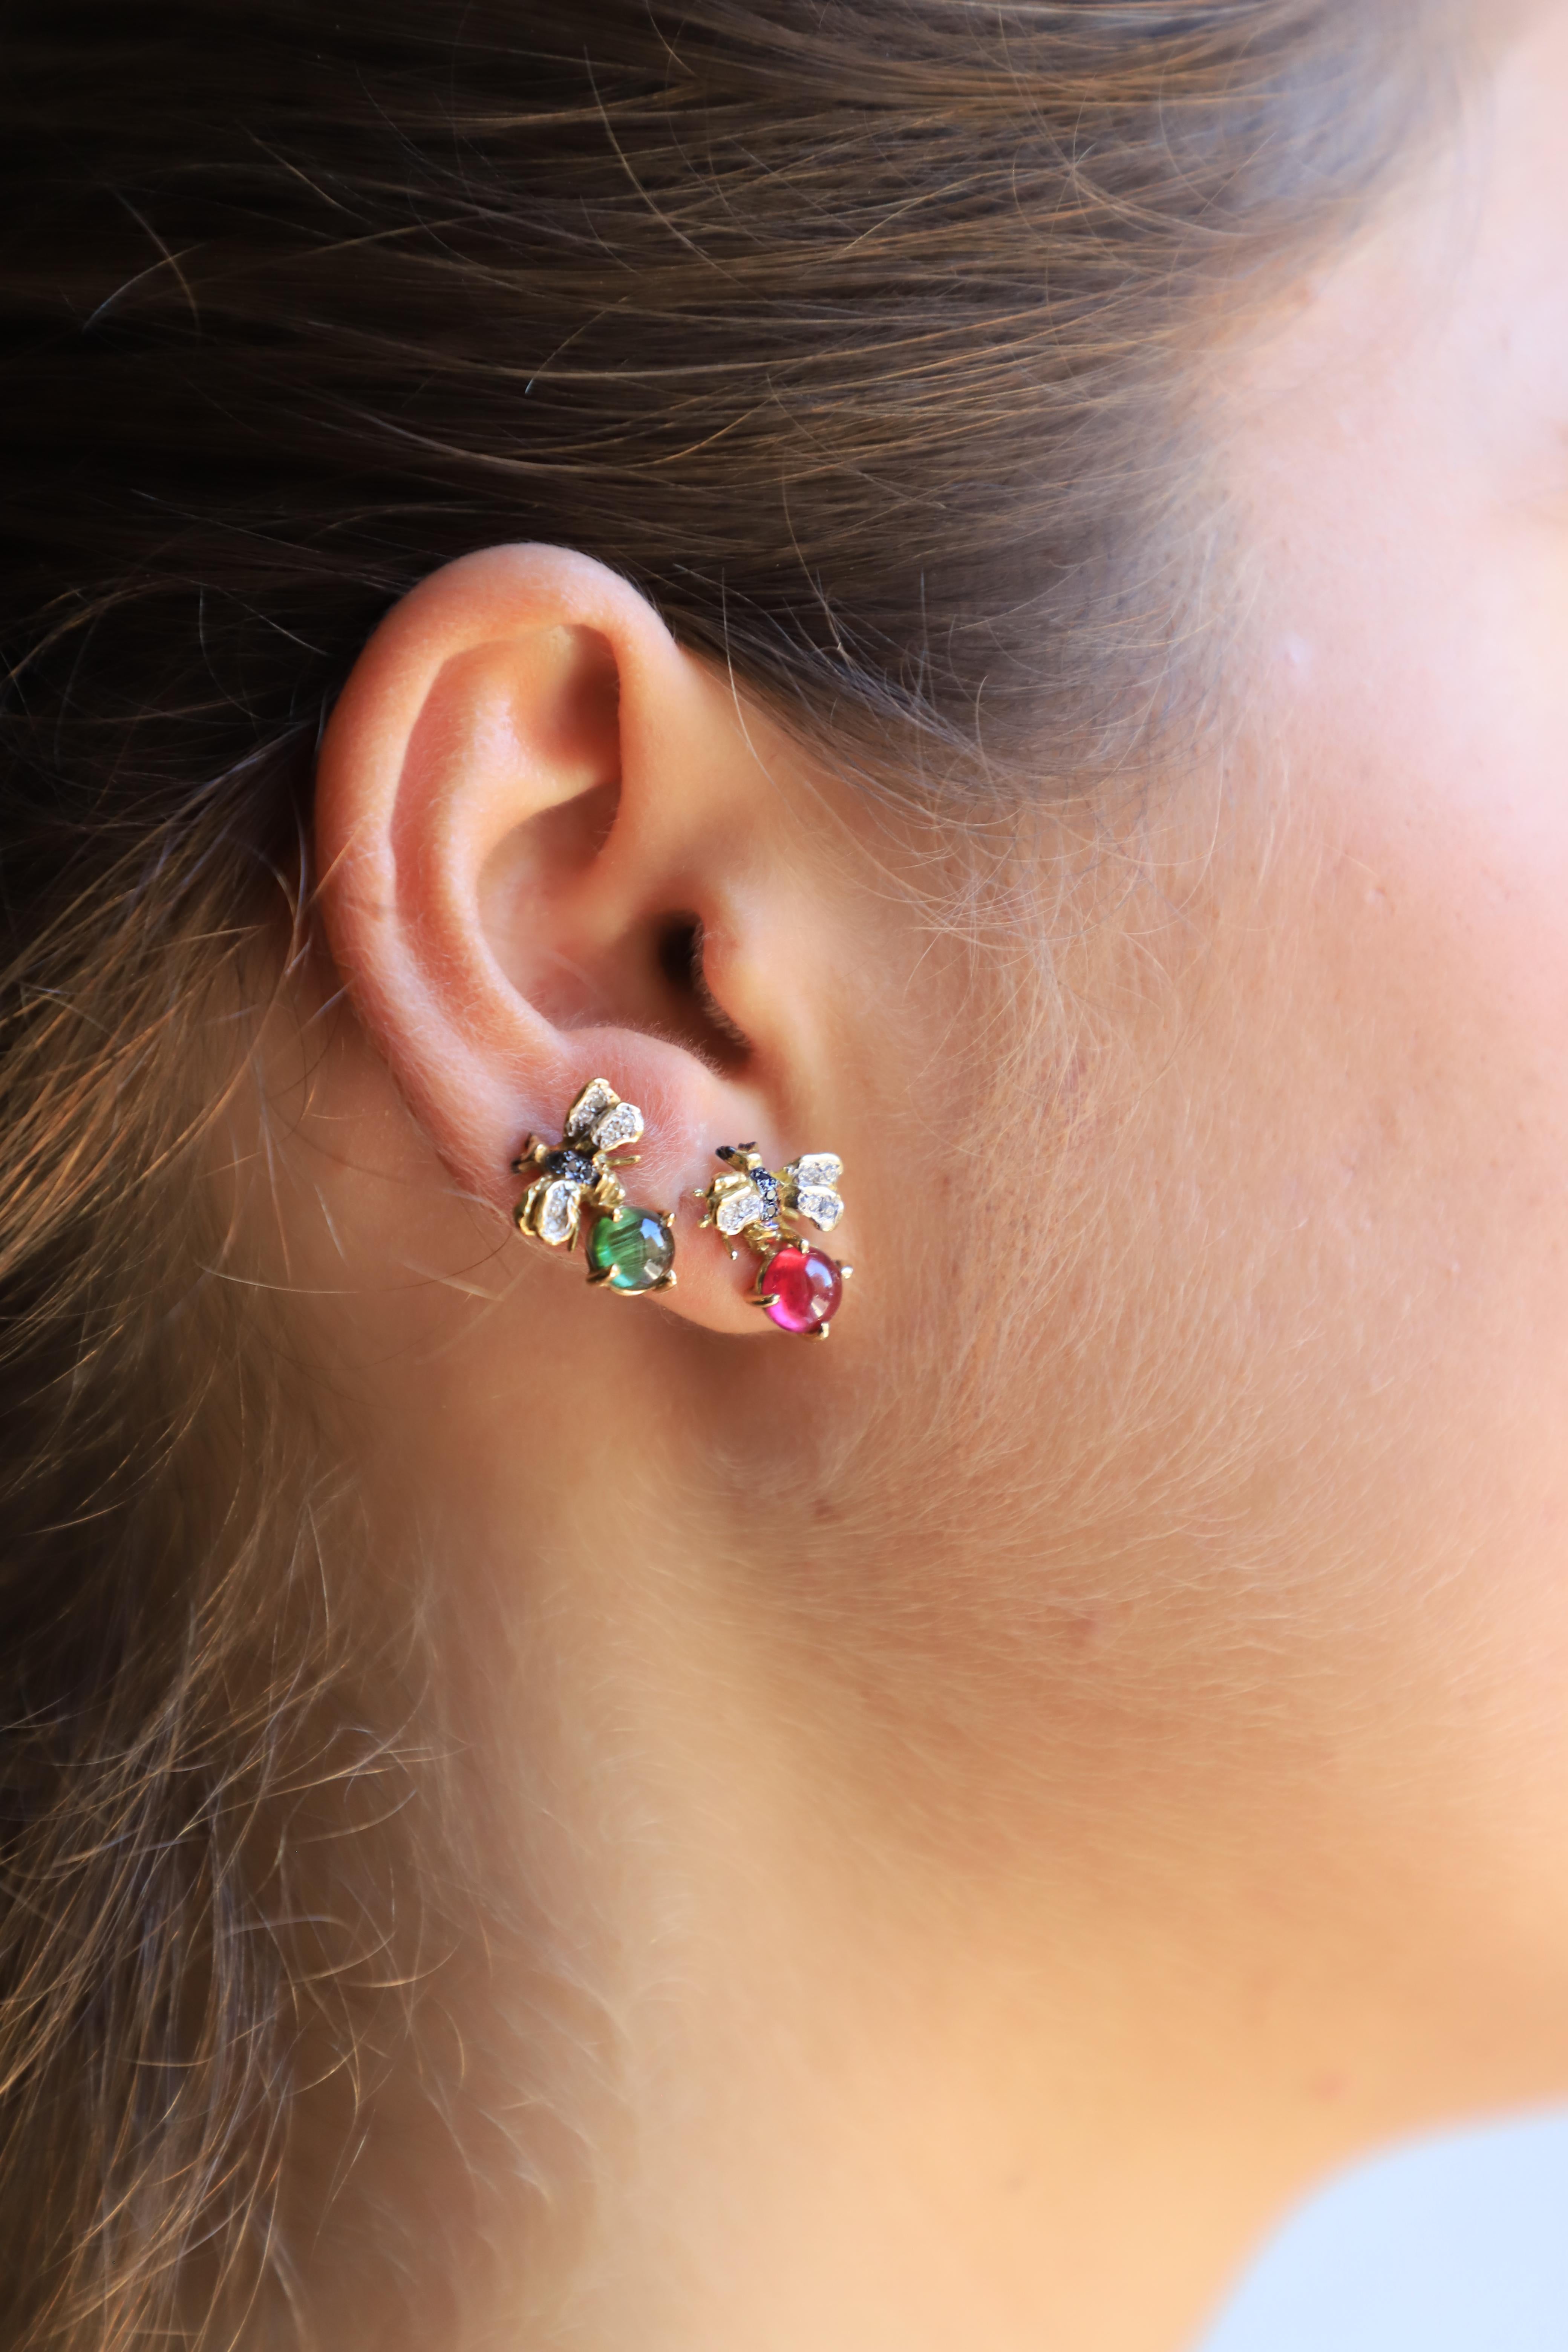 Rossella Ugolini Design Collection 18 Karat Yellow Gold 3.20 Karats Green & Pink Tourmaline 0.10 Karats White Diamond 0.06 Karats Black Diamonds Bees Handcrafted Stud Earrings
We're a workshop so every piece is handmade, customizable and resizable.